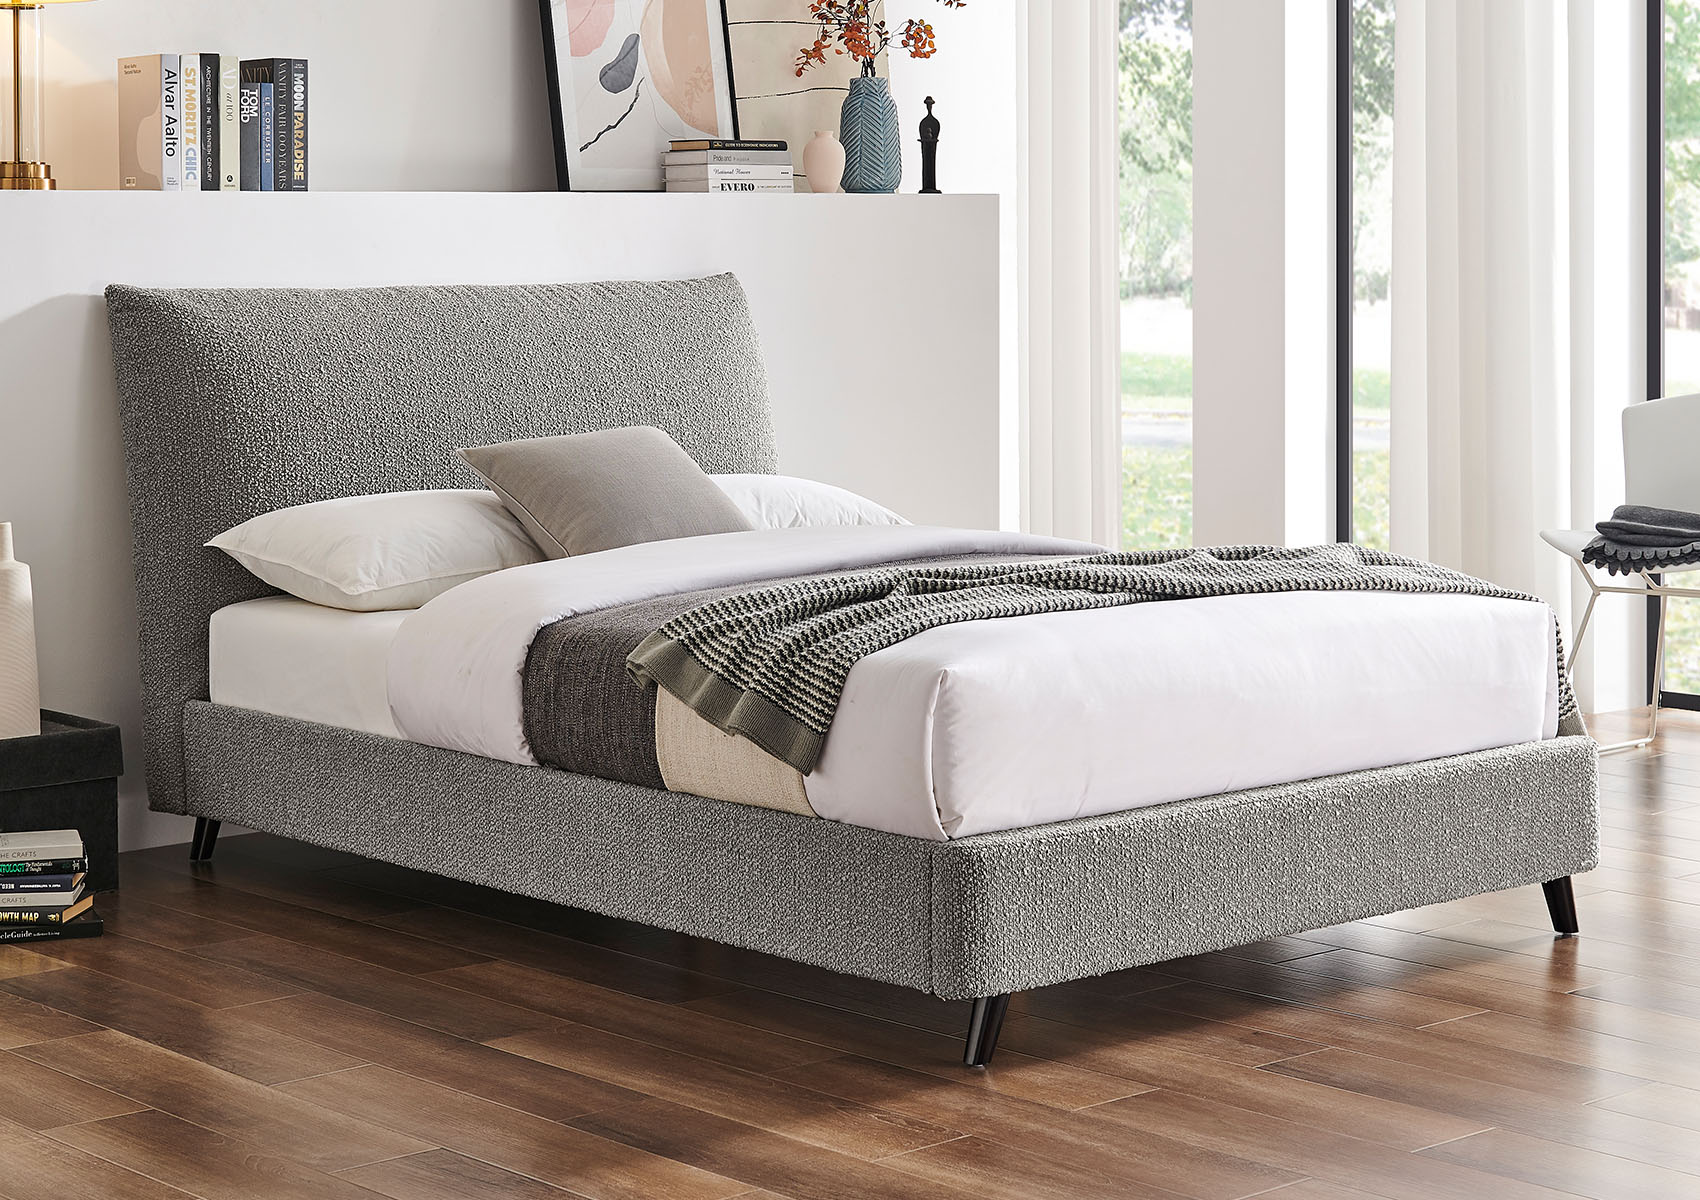 View Tranquil Boucle Dove Grey Bed Frame Time4Sleep information